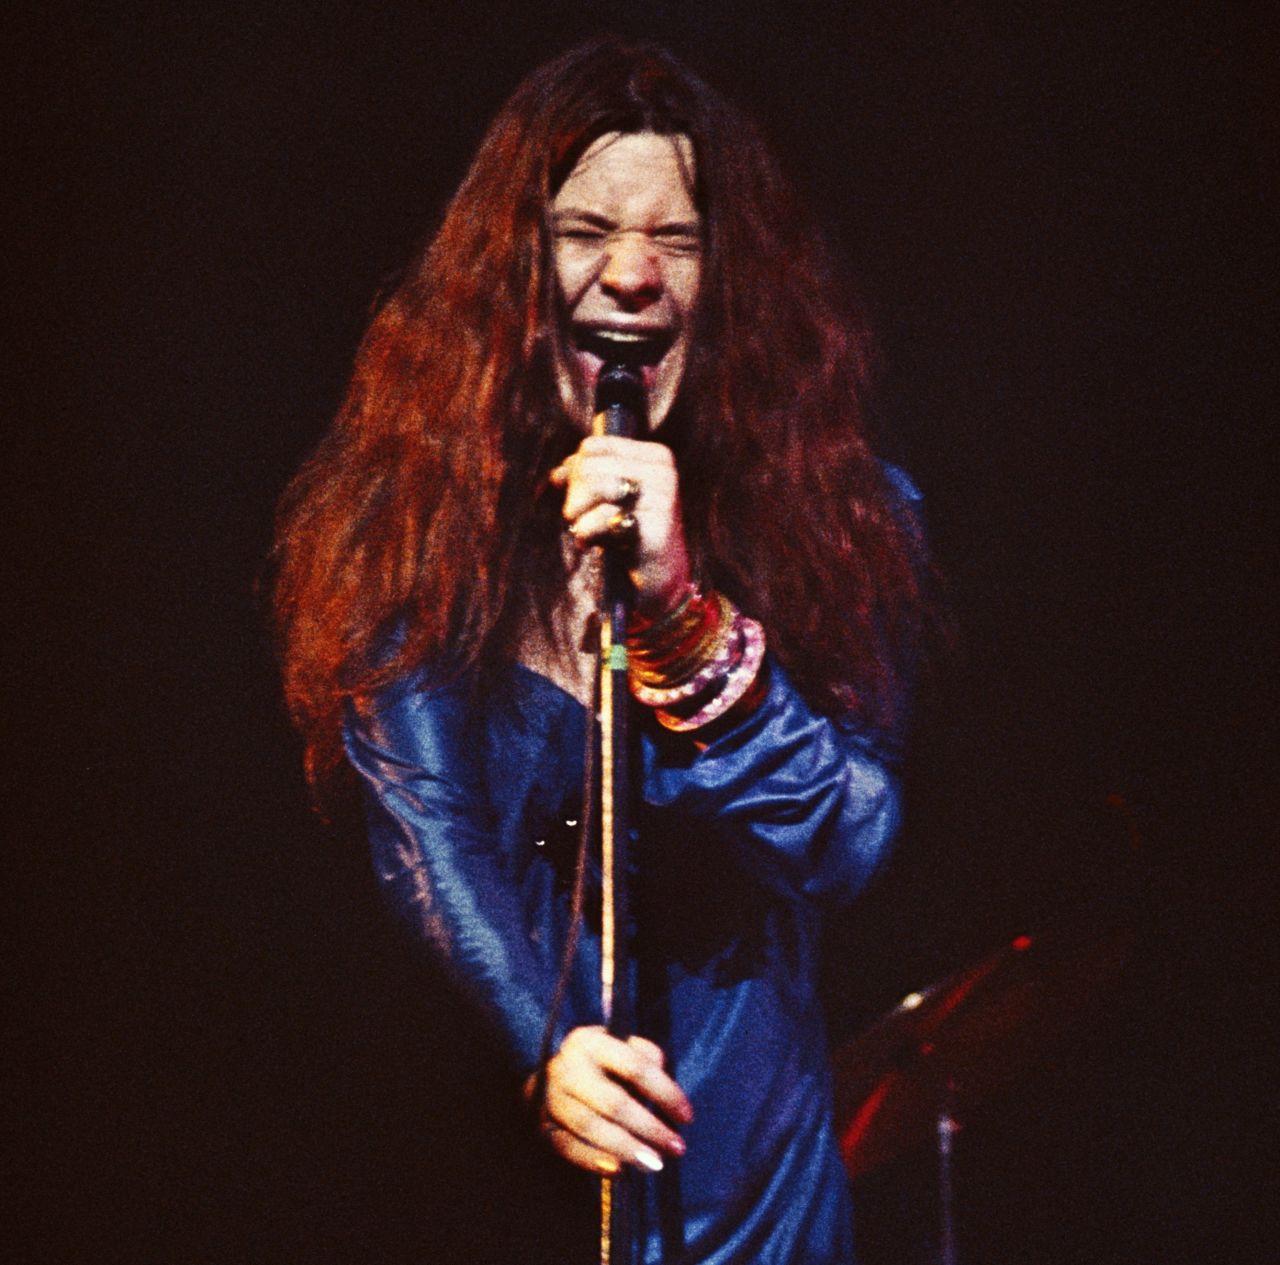 Considered one of the premier female rock singers of her time, Janis Joplin was found dead in her apartment on October 4, 1970, from an overdose of heroin. She was 27 years old.